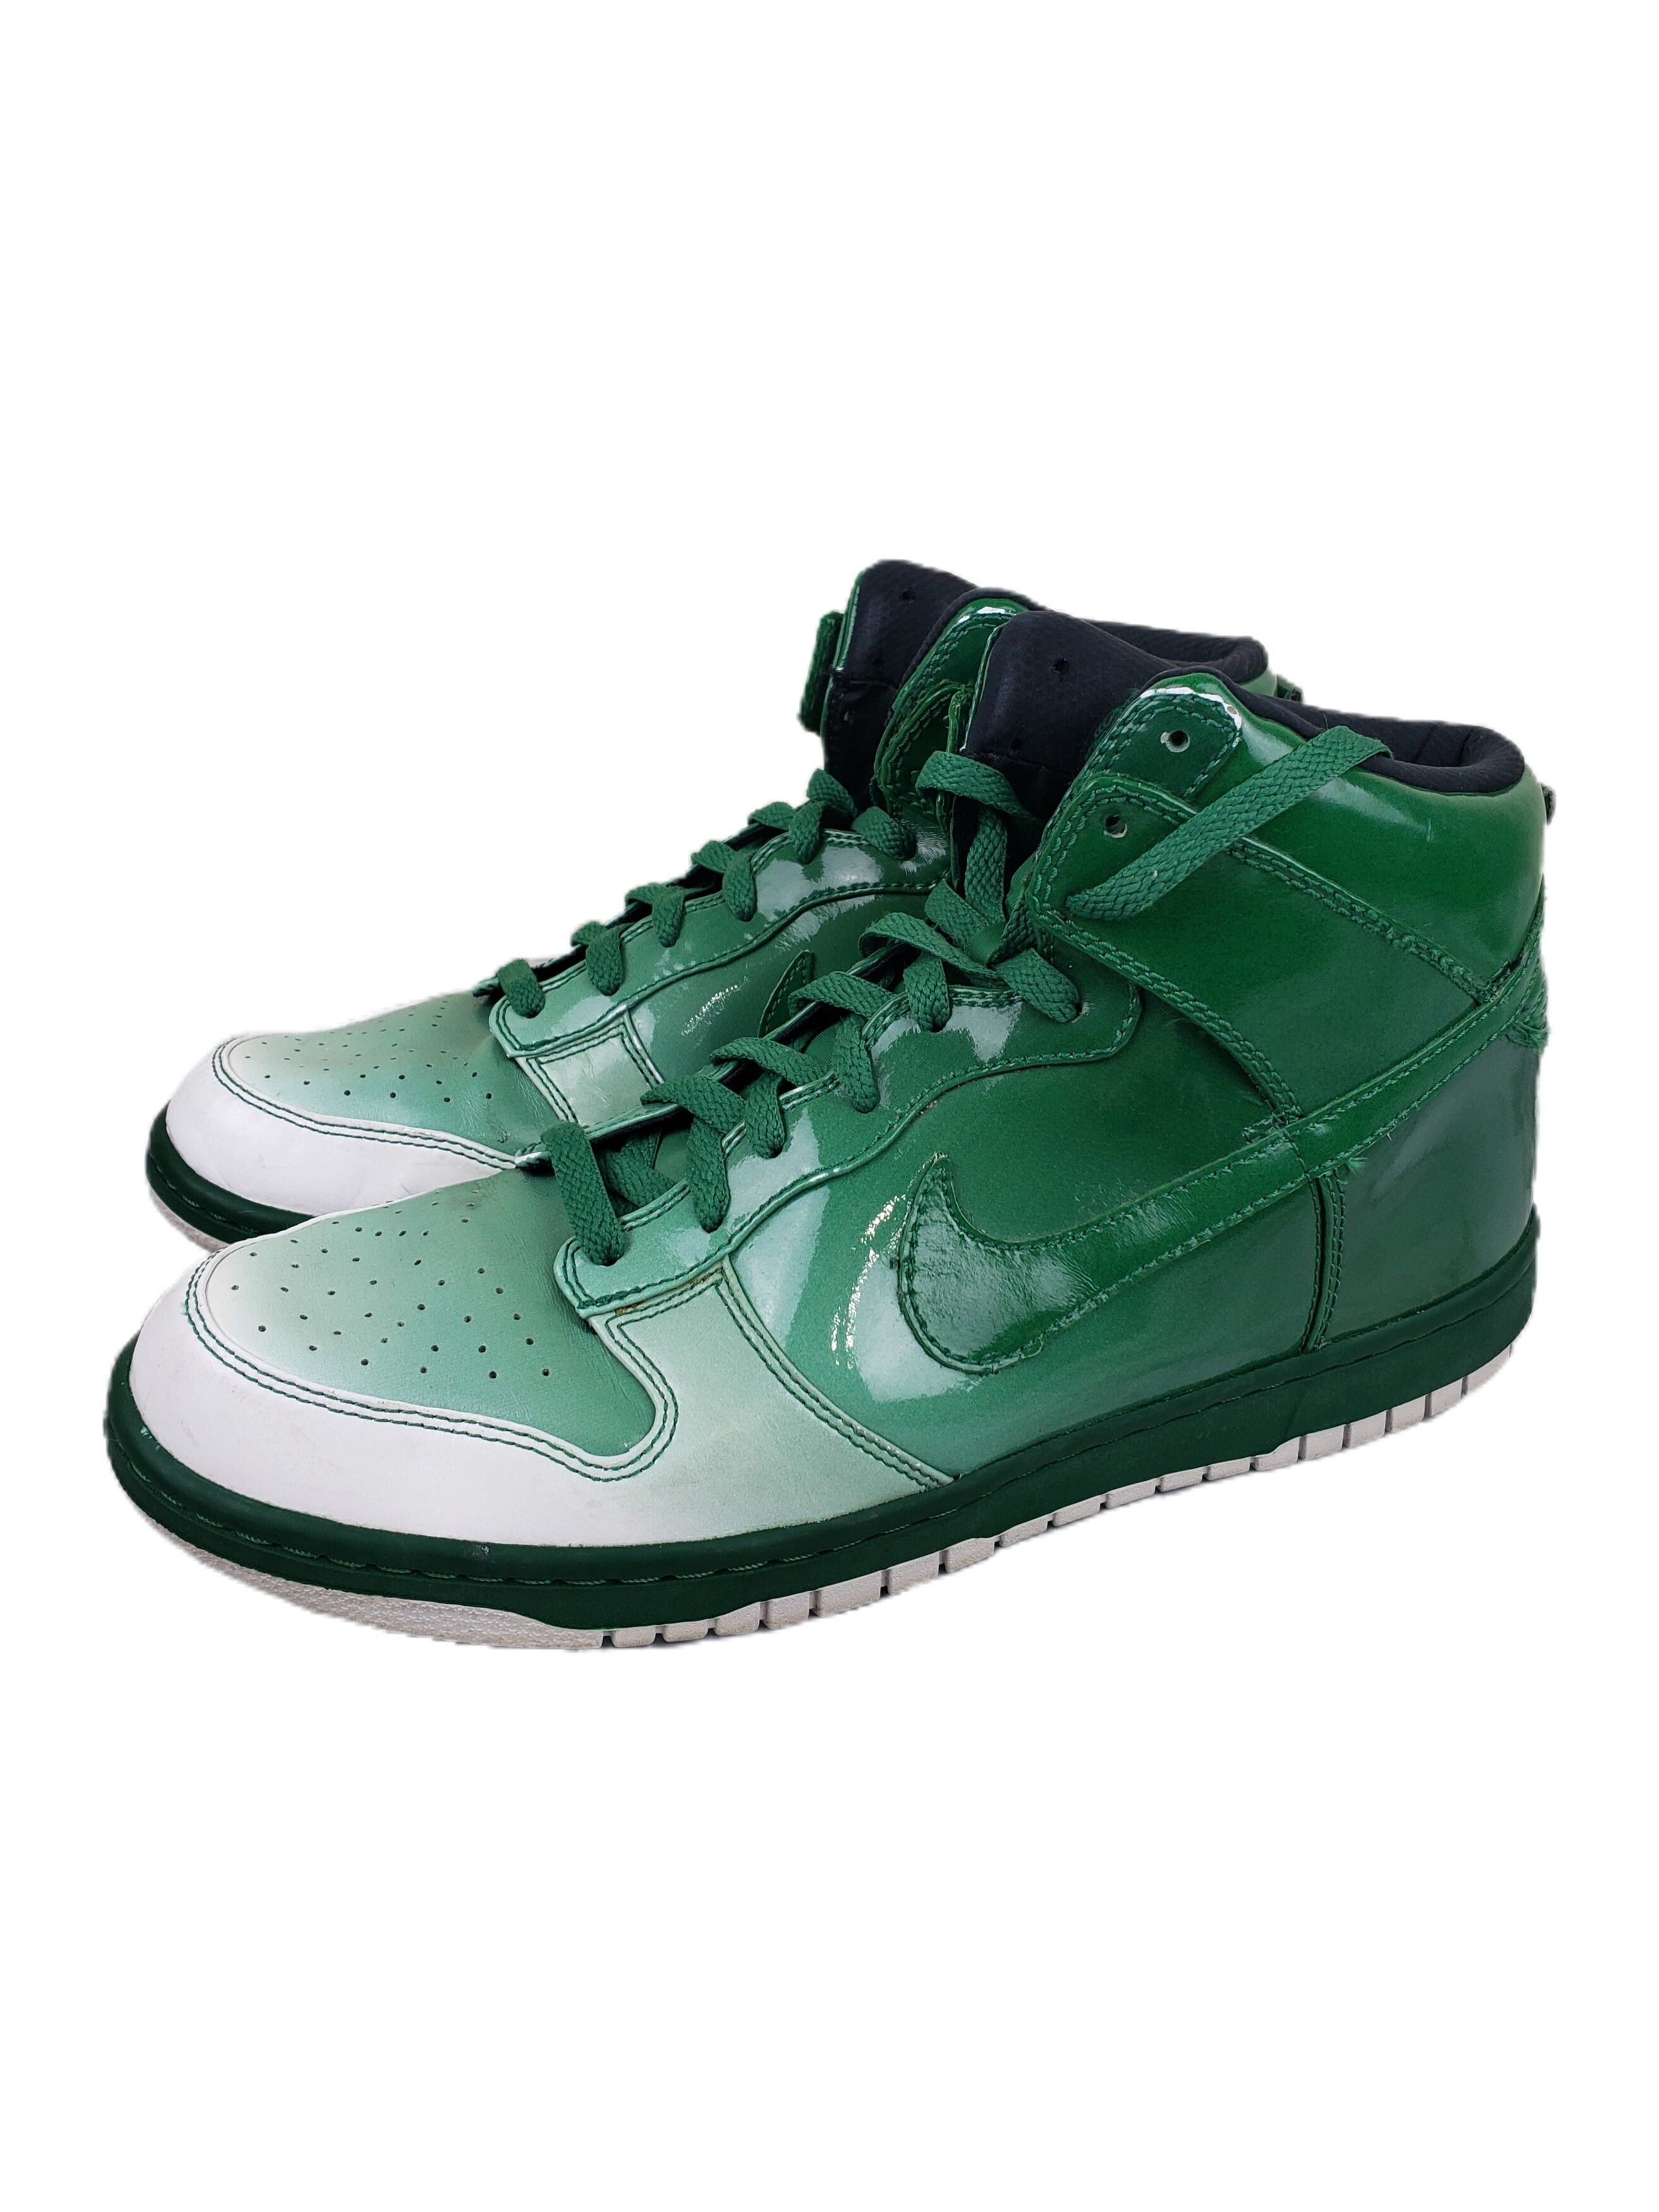 Pre-owned Nike Dunk High Spark Destroyer Green Shoes